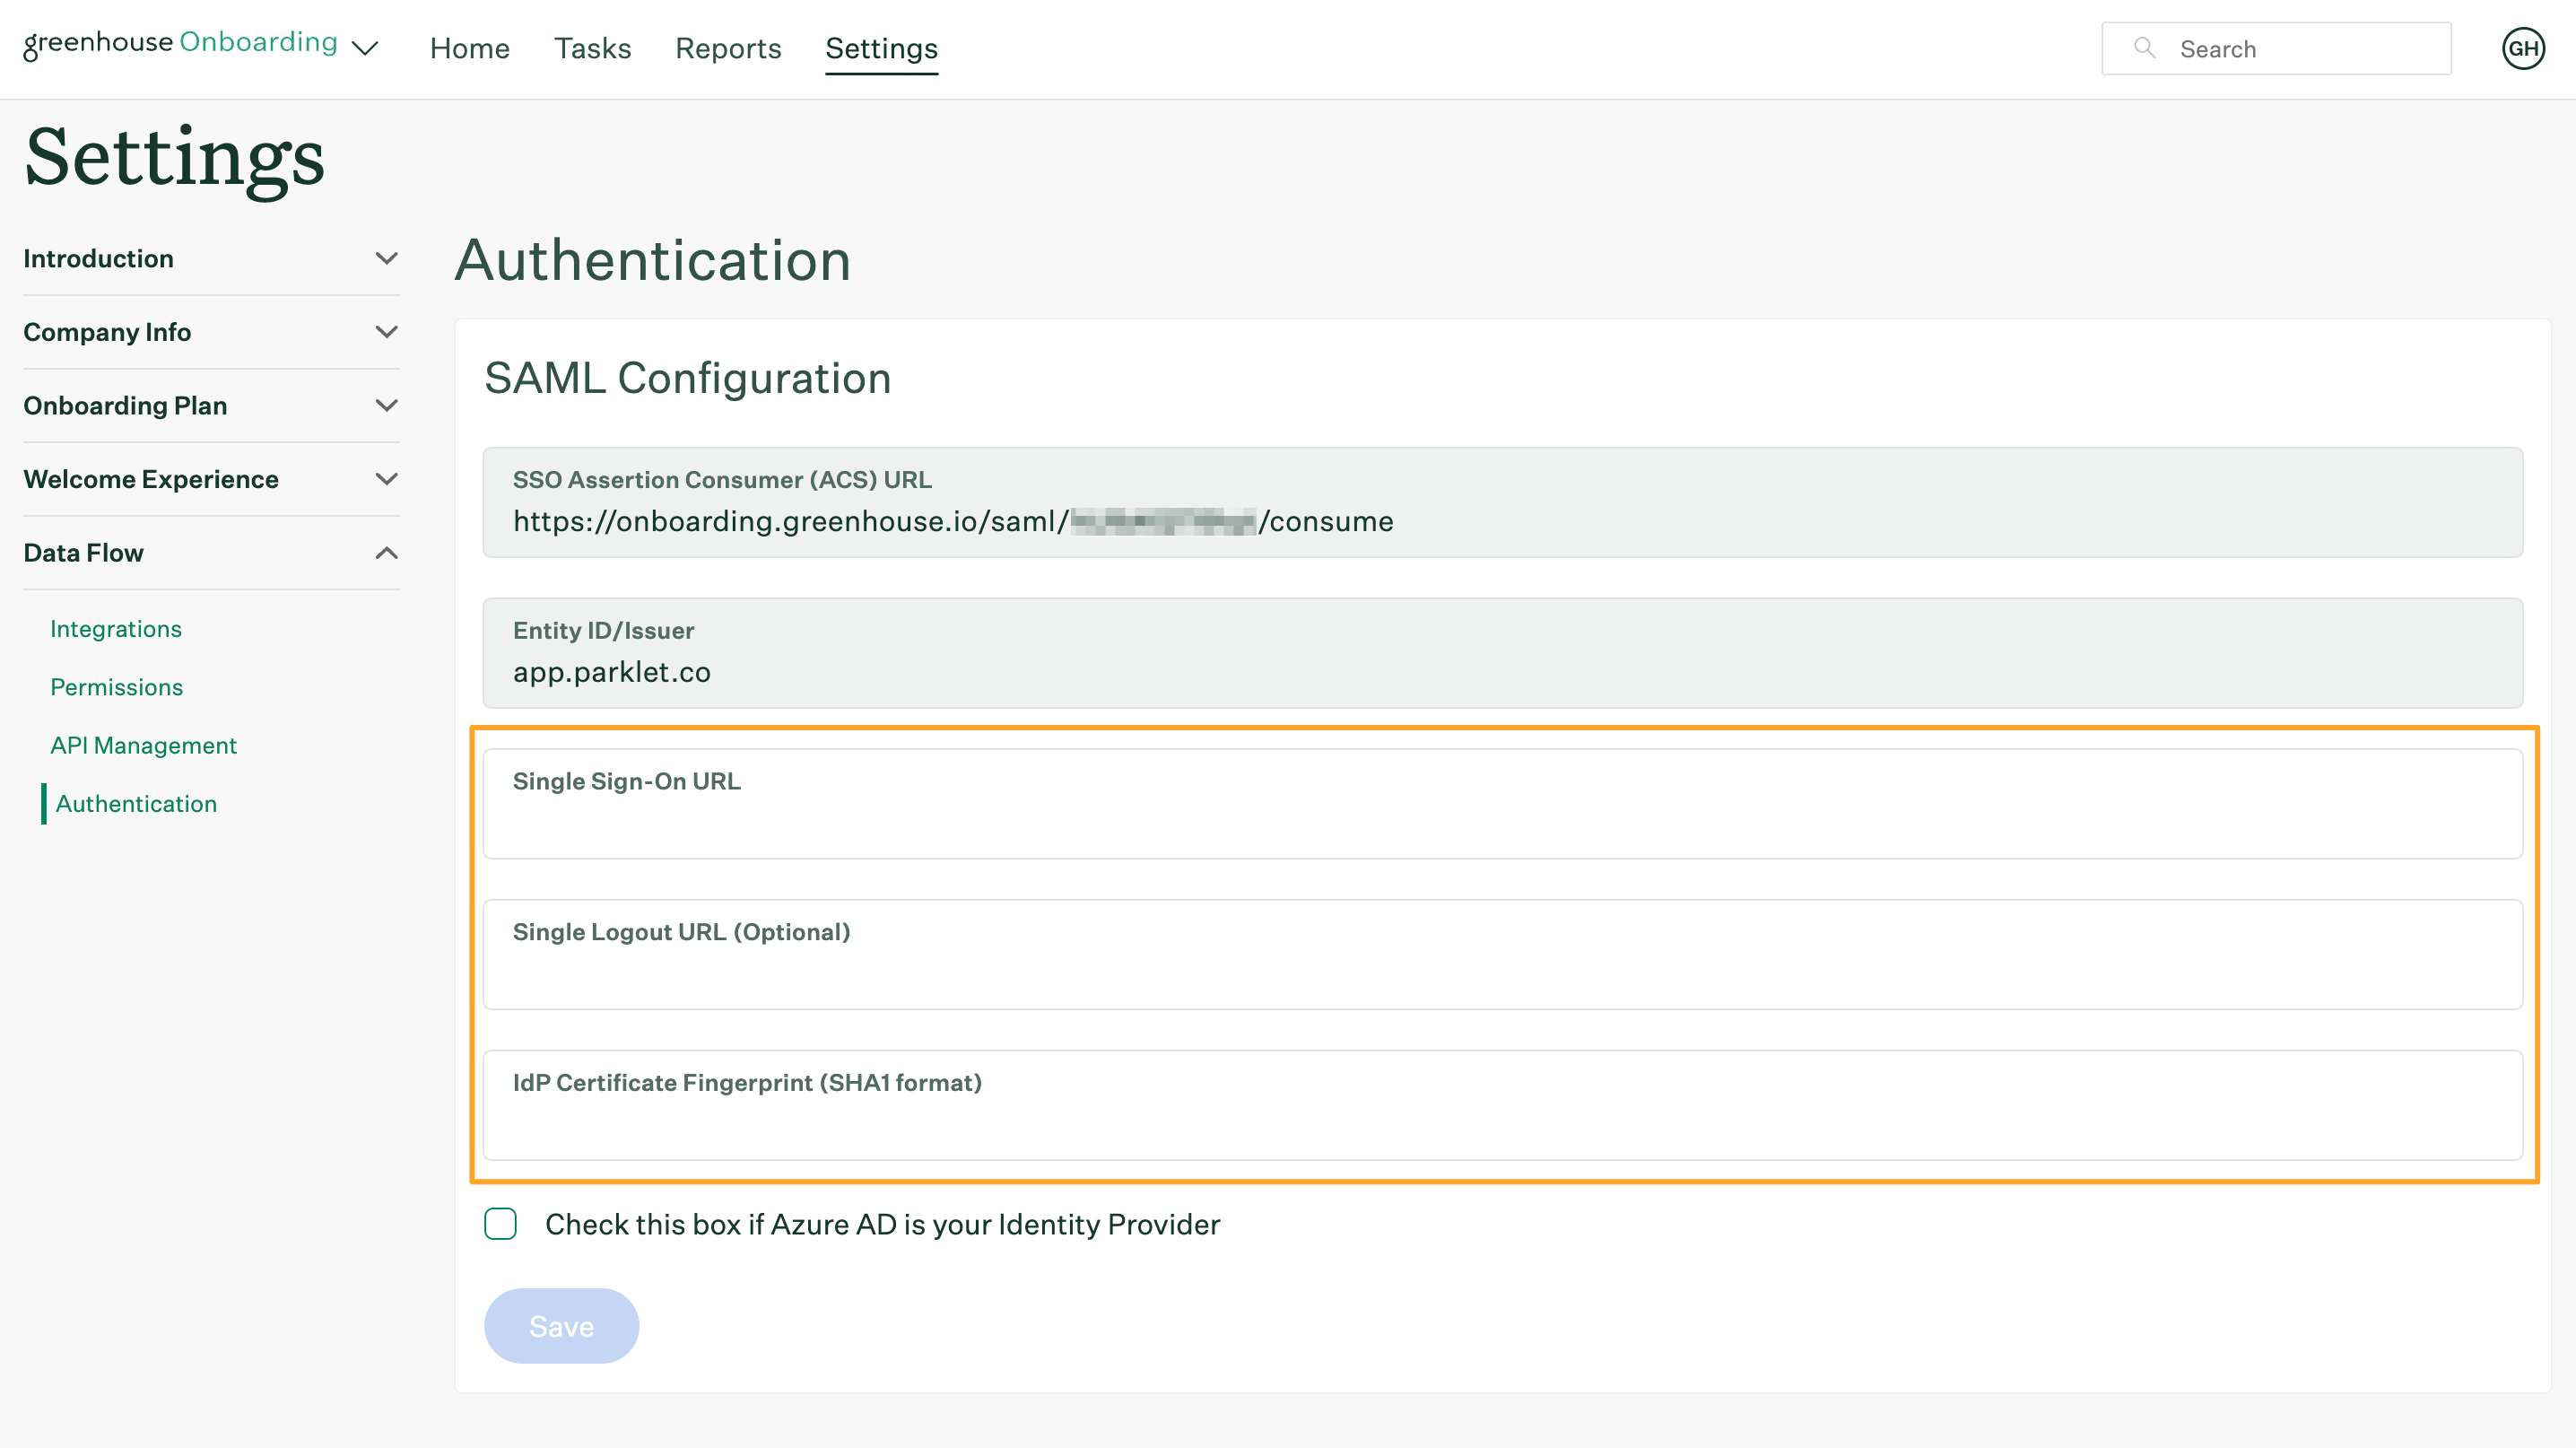 Fields in Greenhouse Onboarding Authentication page to fill out with Google credentials